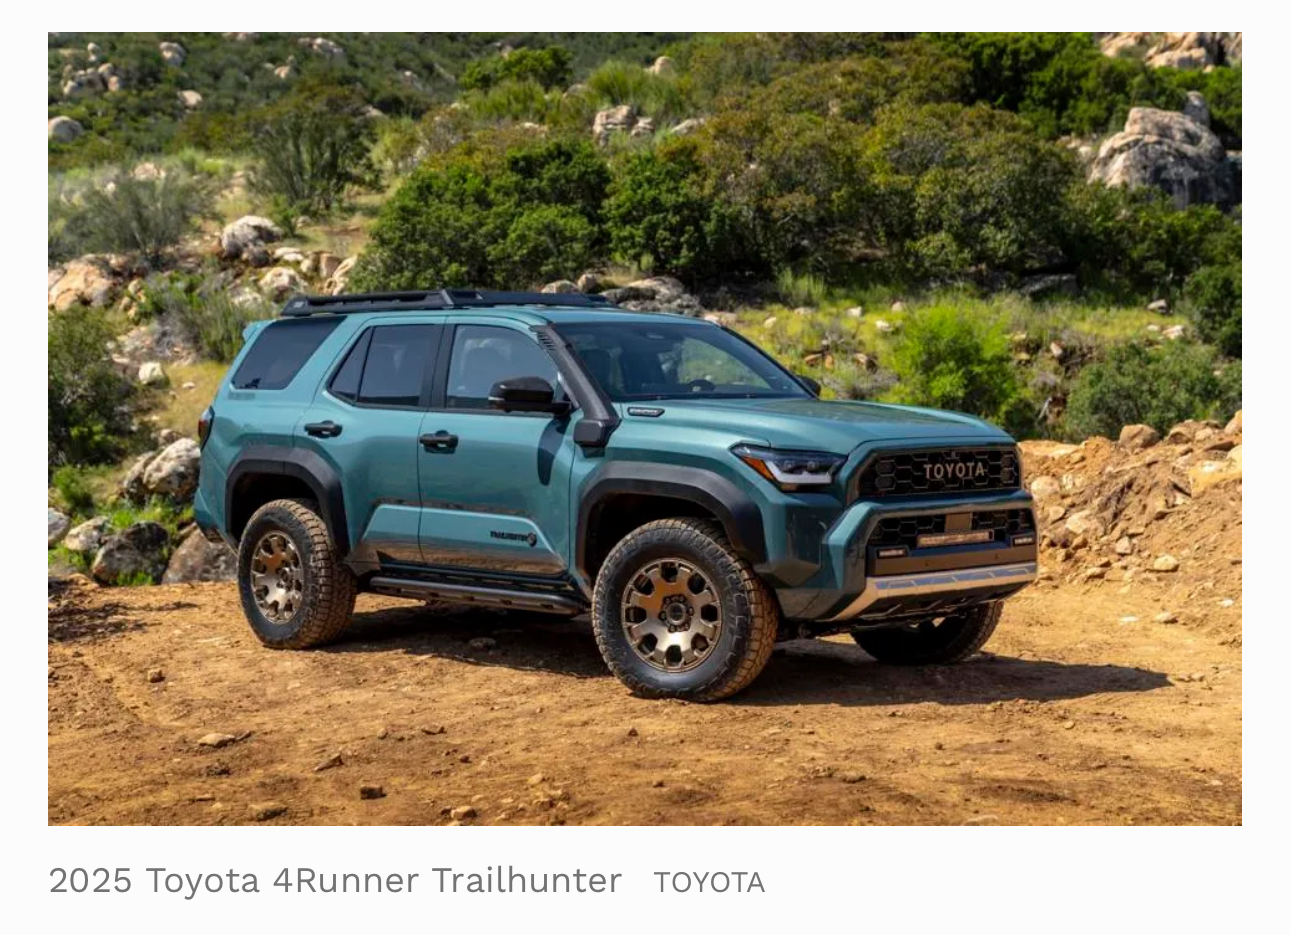 2025 Toyota 4runner 2025 4Runner (6th Gen) News, Specs, Engines, Release Date, Production Date & Preview Renderings -- Insider Info (as of 7/30/23) IMG_3835